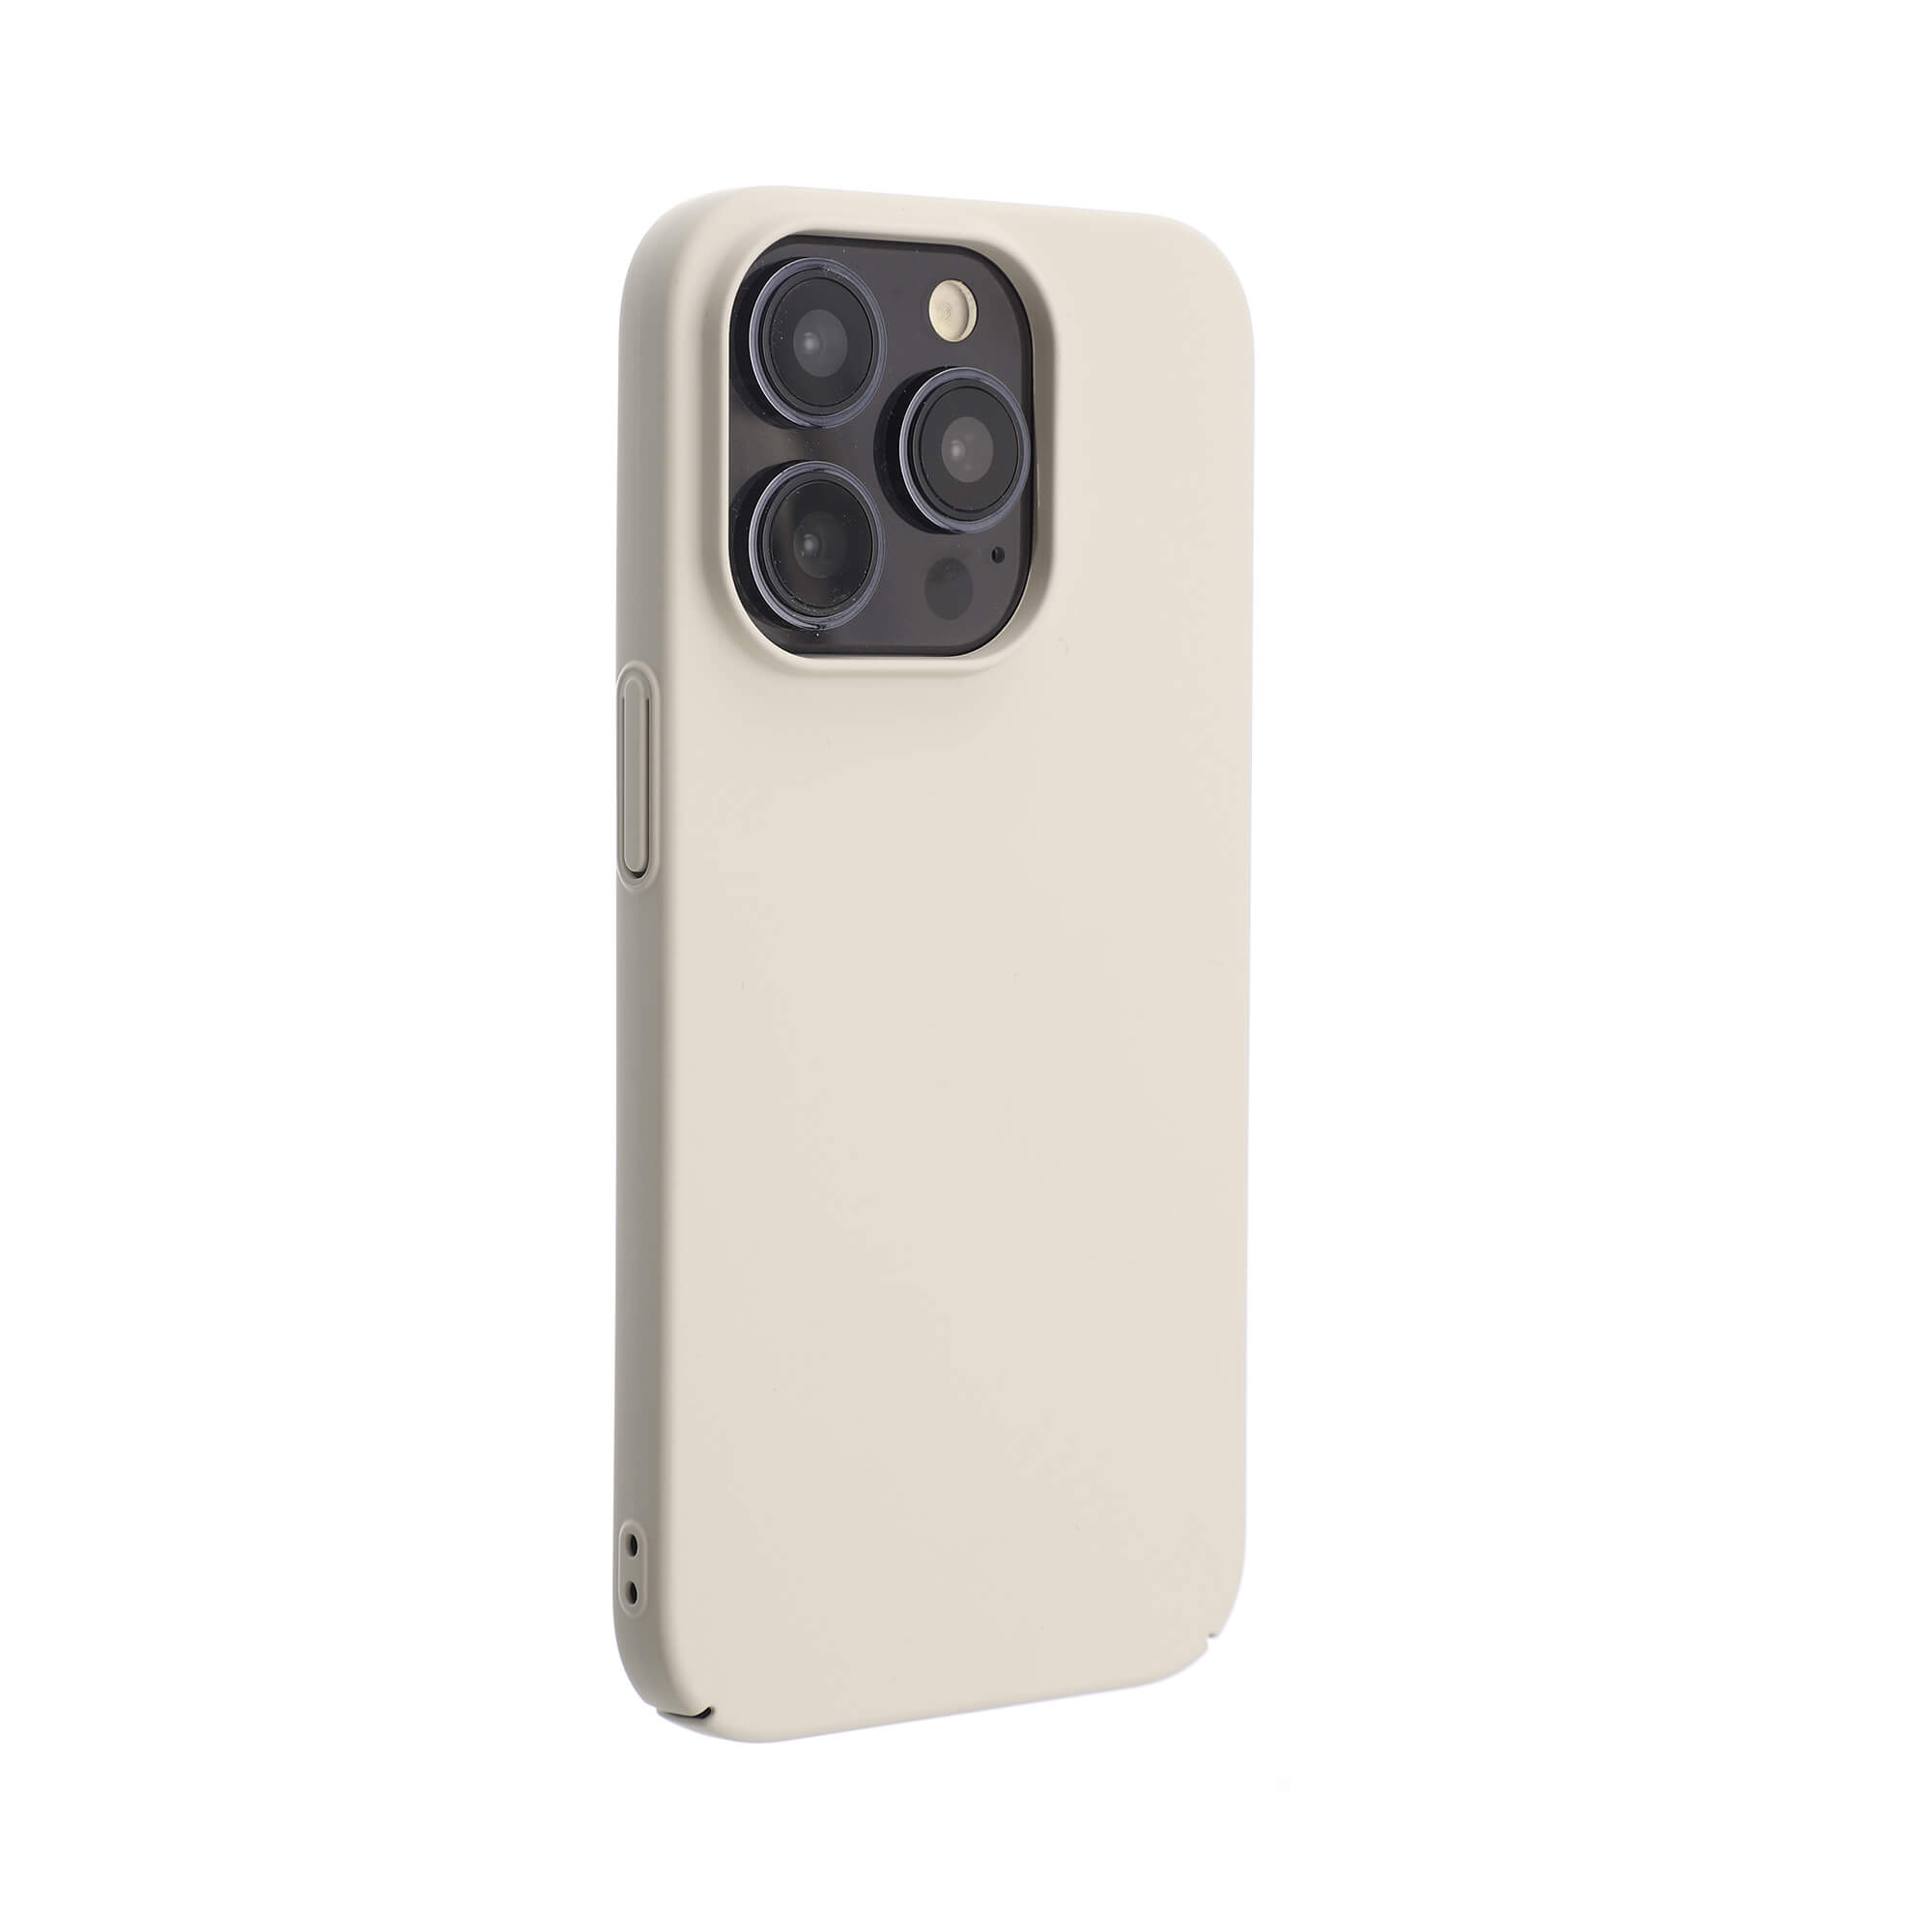 Jolly high quality phone cover online for iphone xs-2